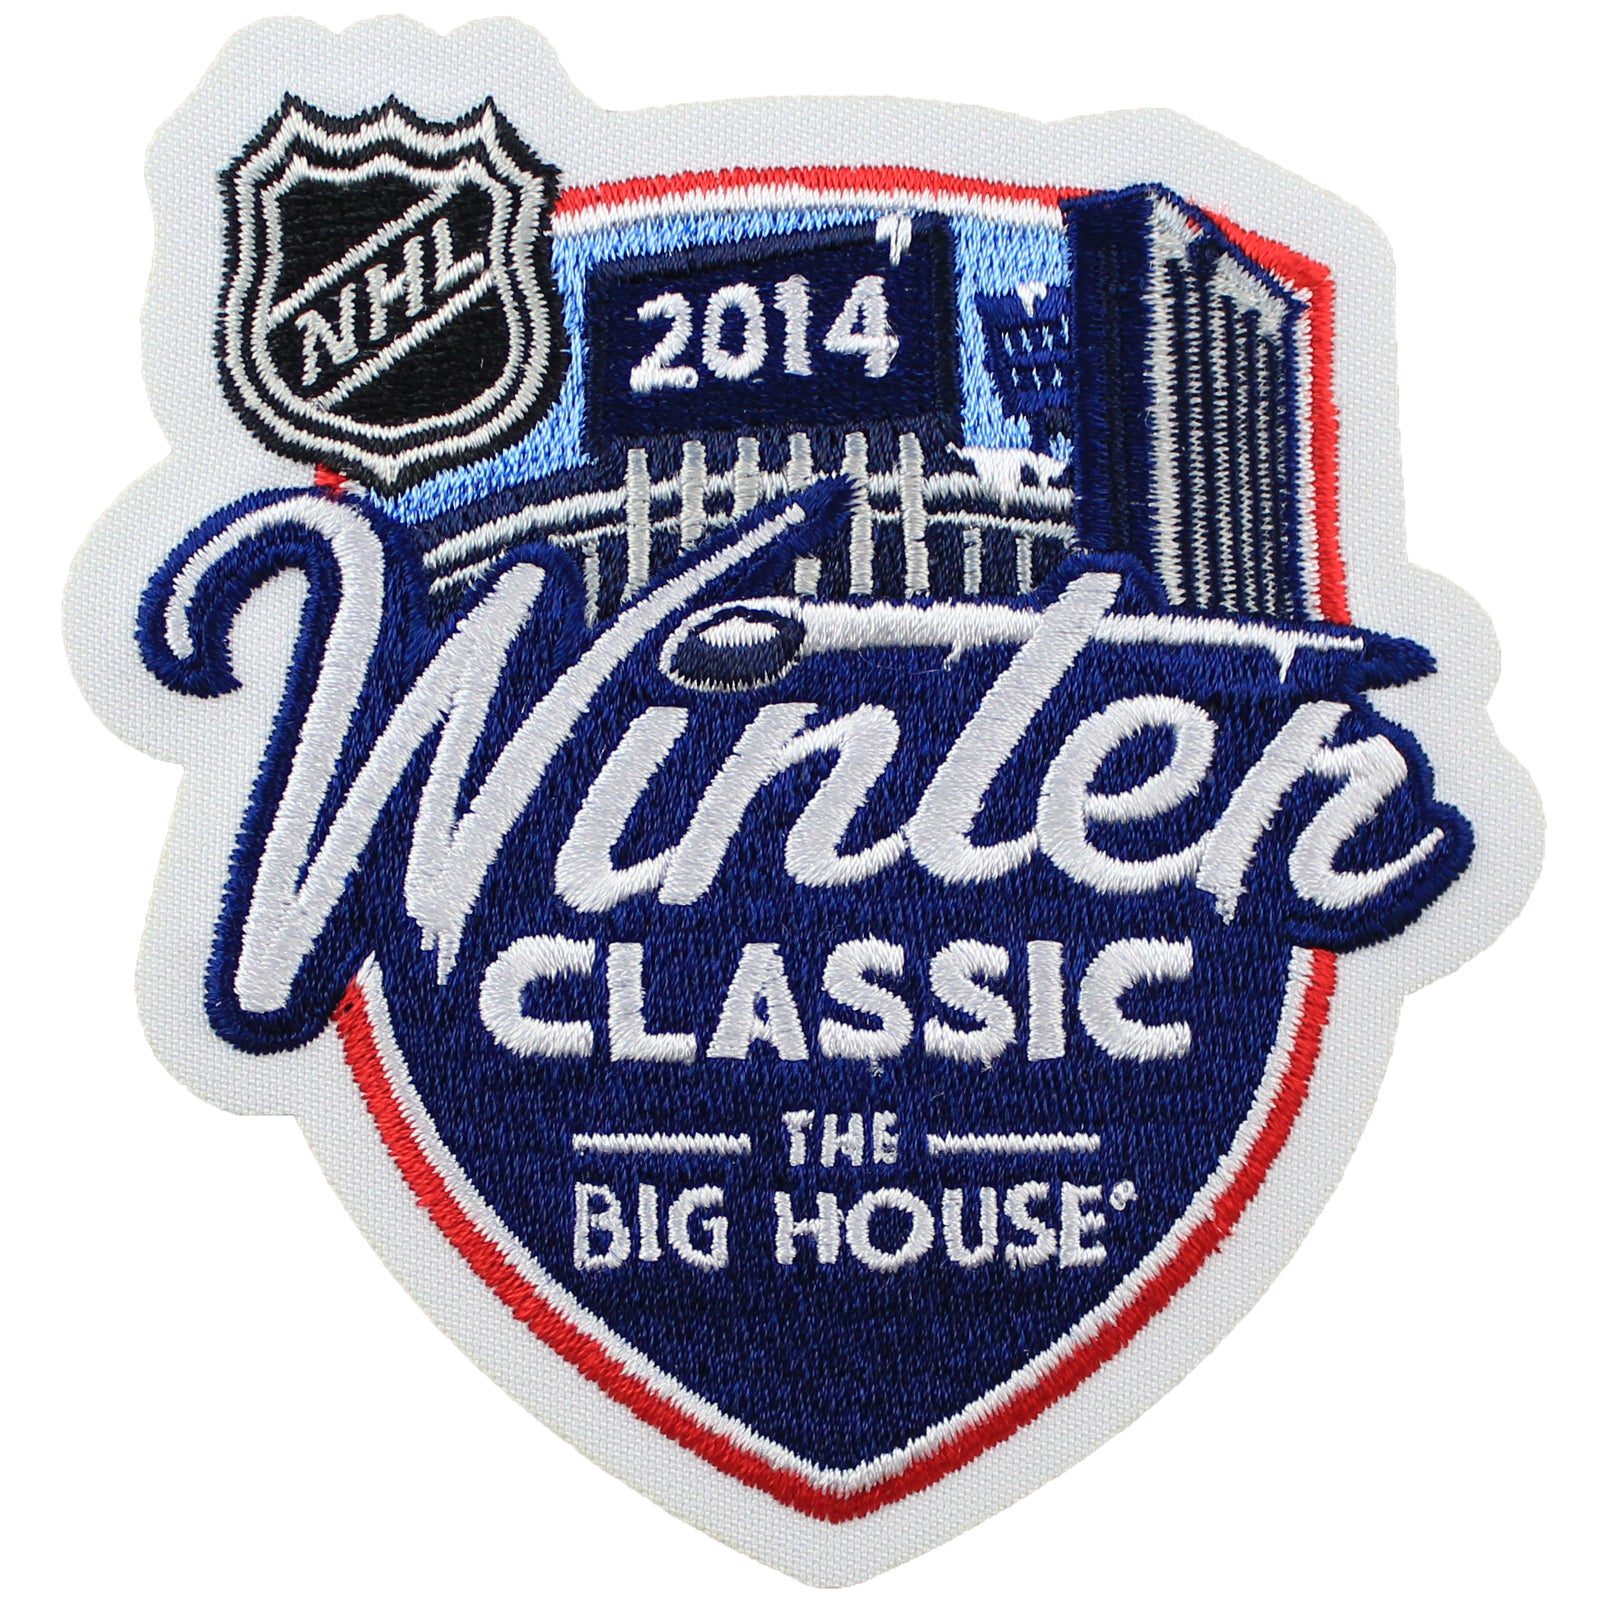 ALTERNATE A OFFICIAL PATCH FOR DETROIT RED WINGS WHITE JERSEY